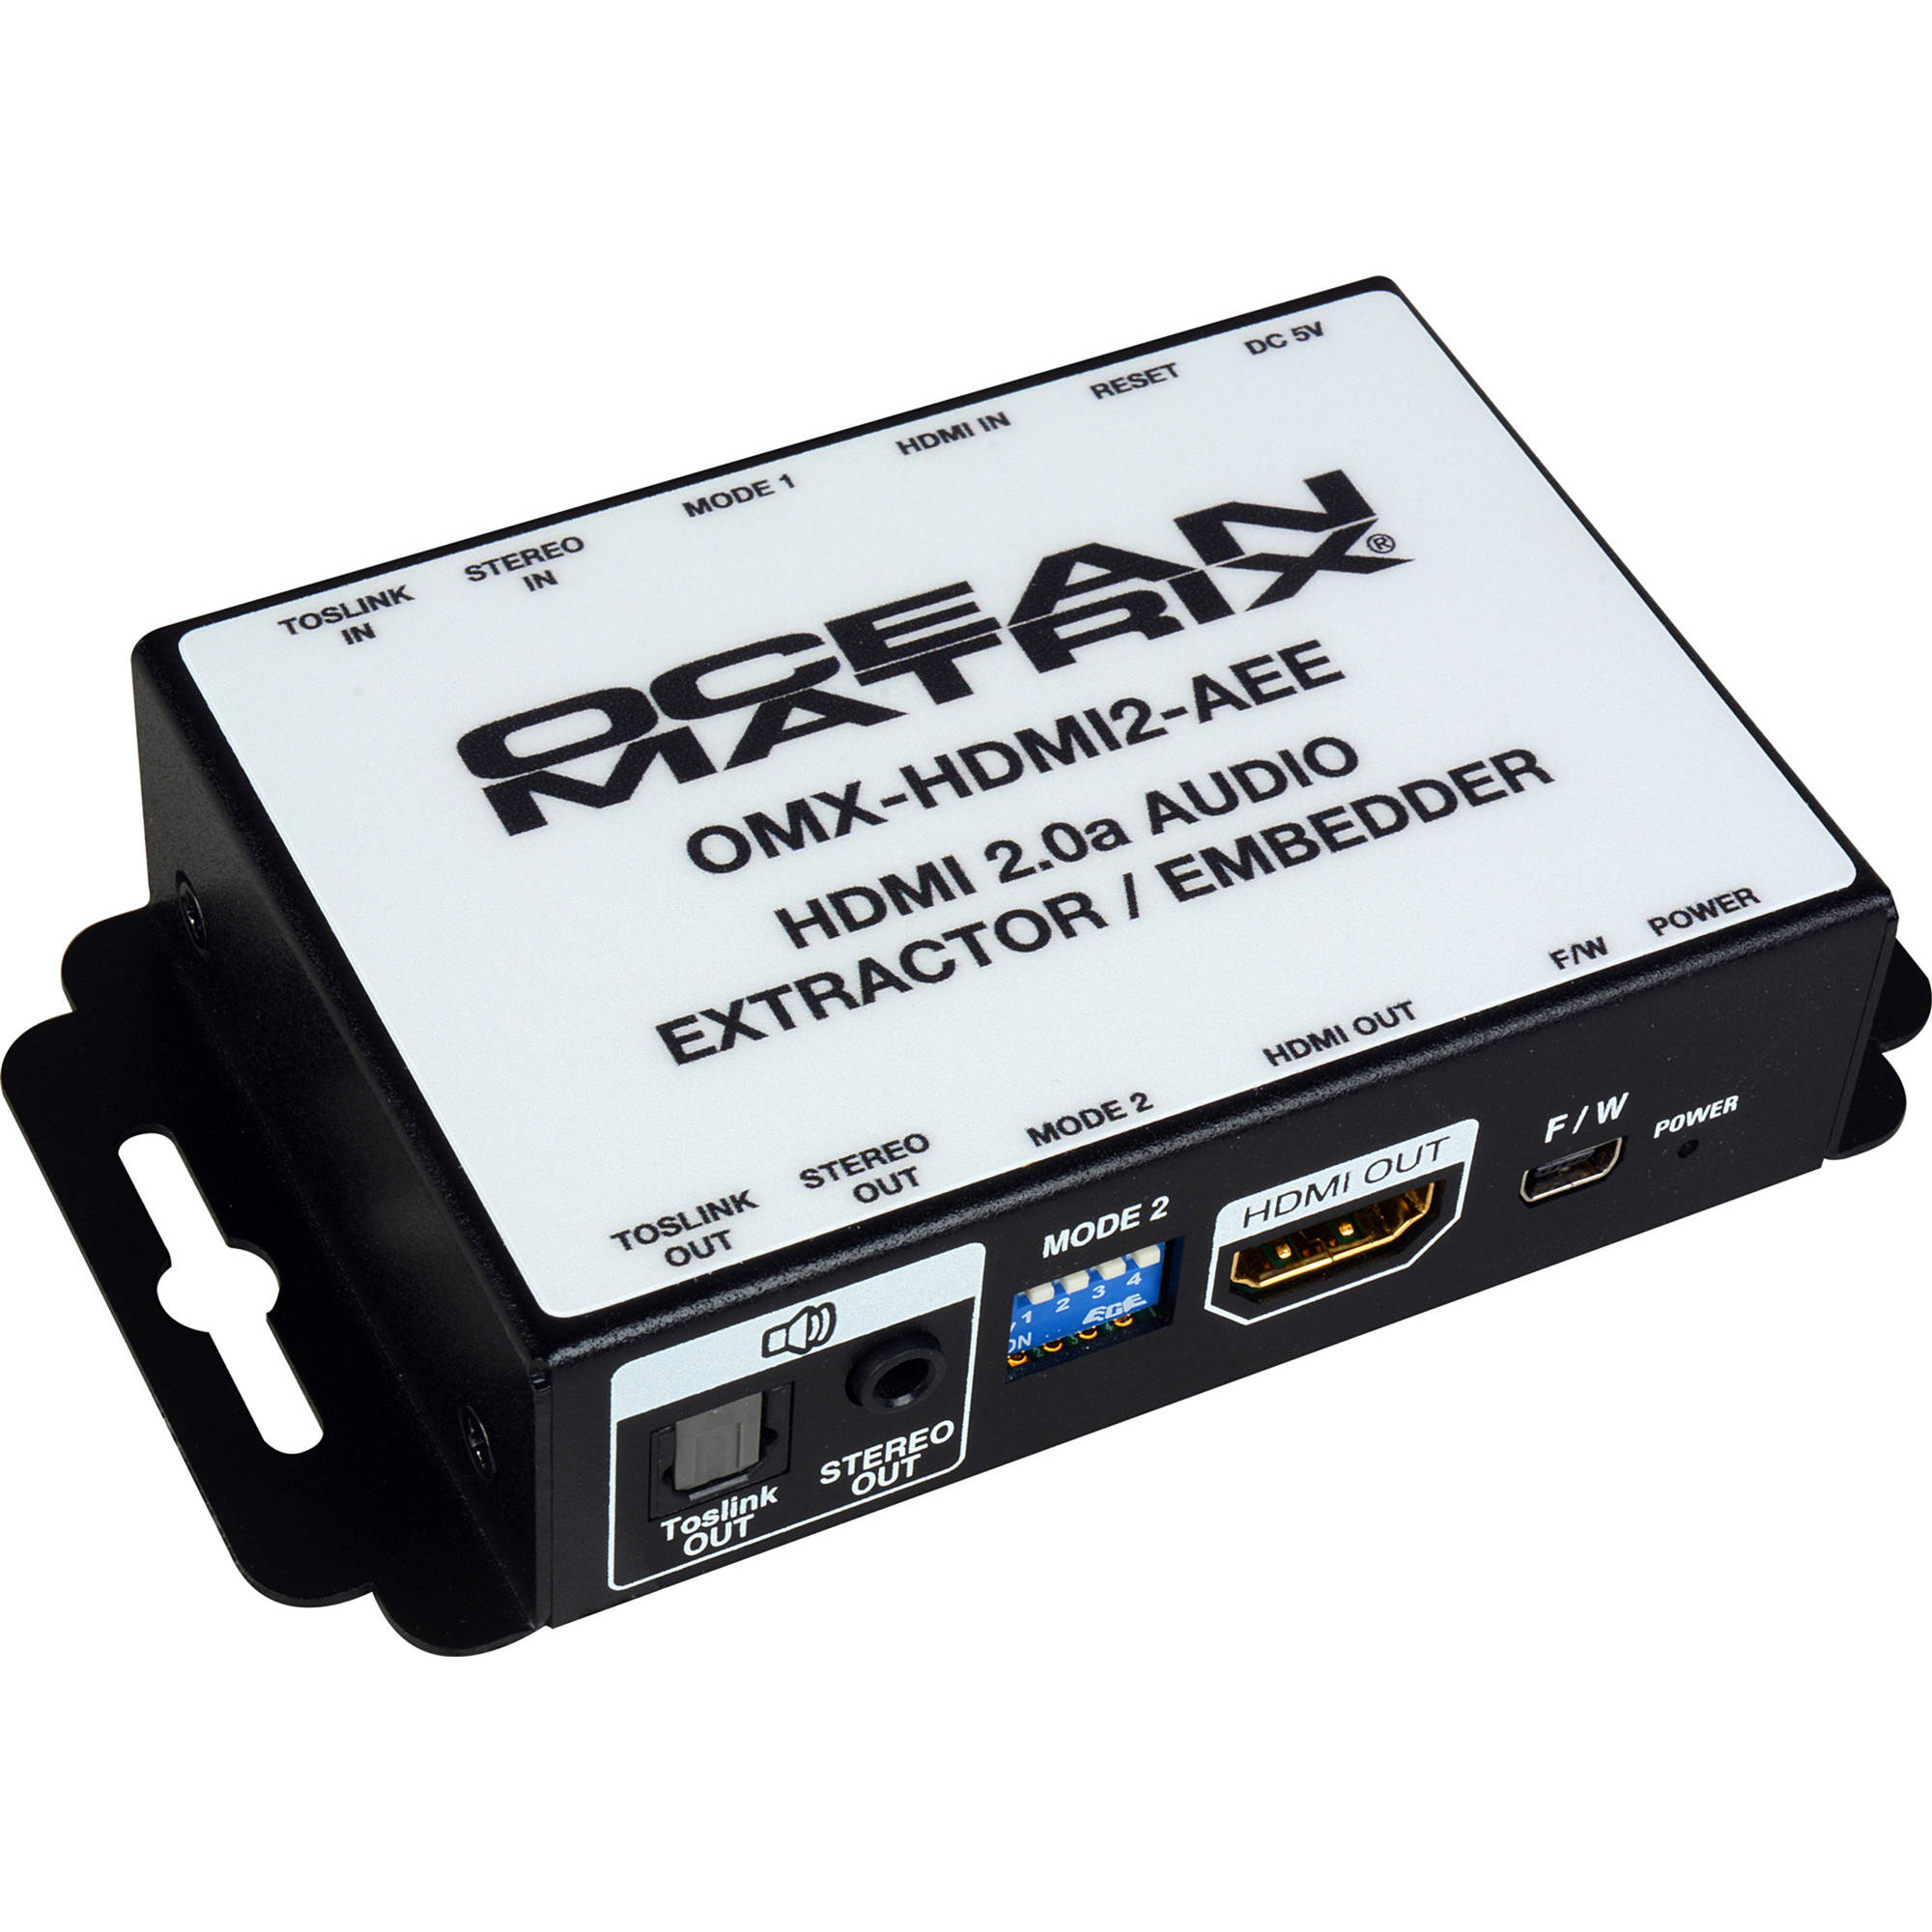 Ocean Matrix OMX-HDMI2-AEE 4K HDMI 2.0 Audio Extractor and Embedder